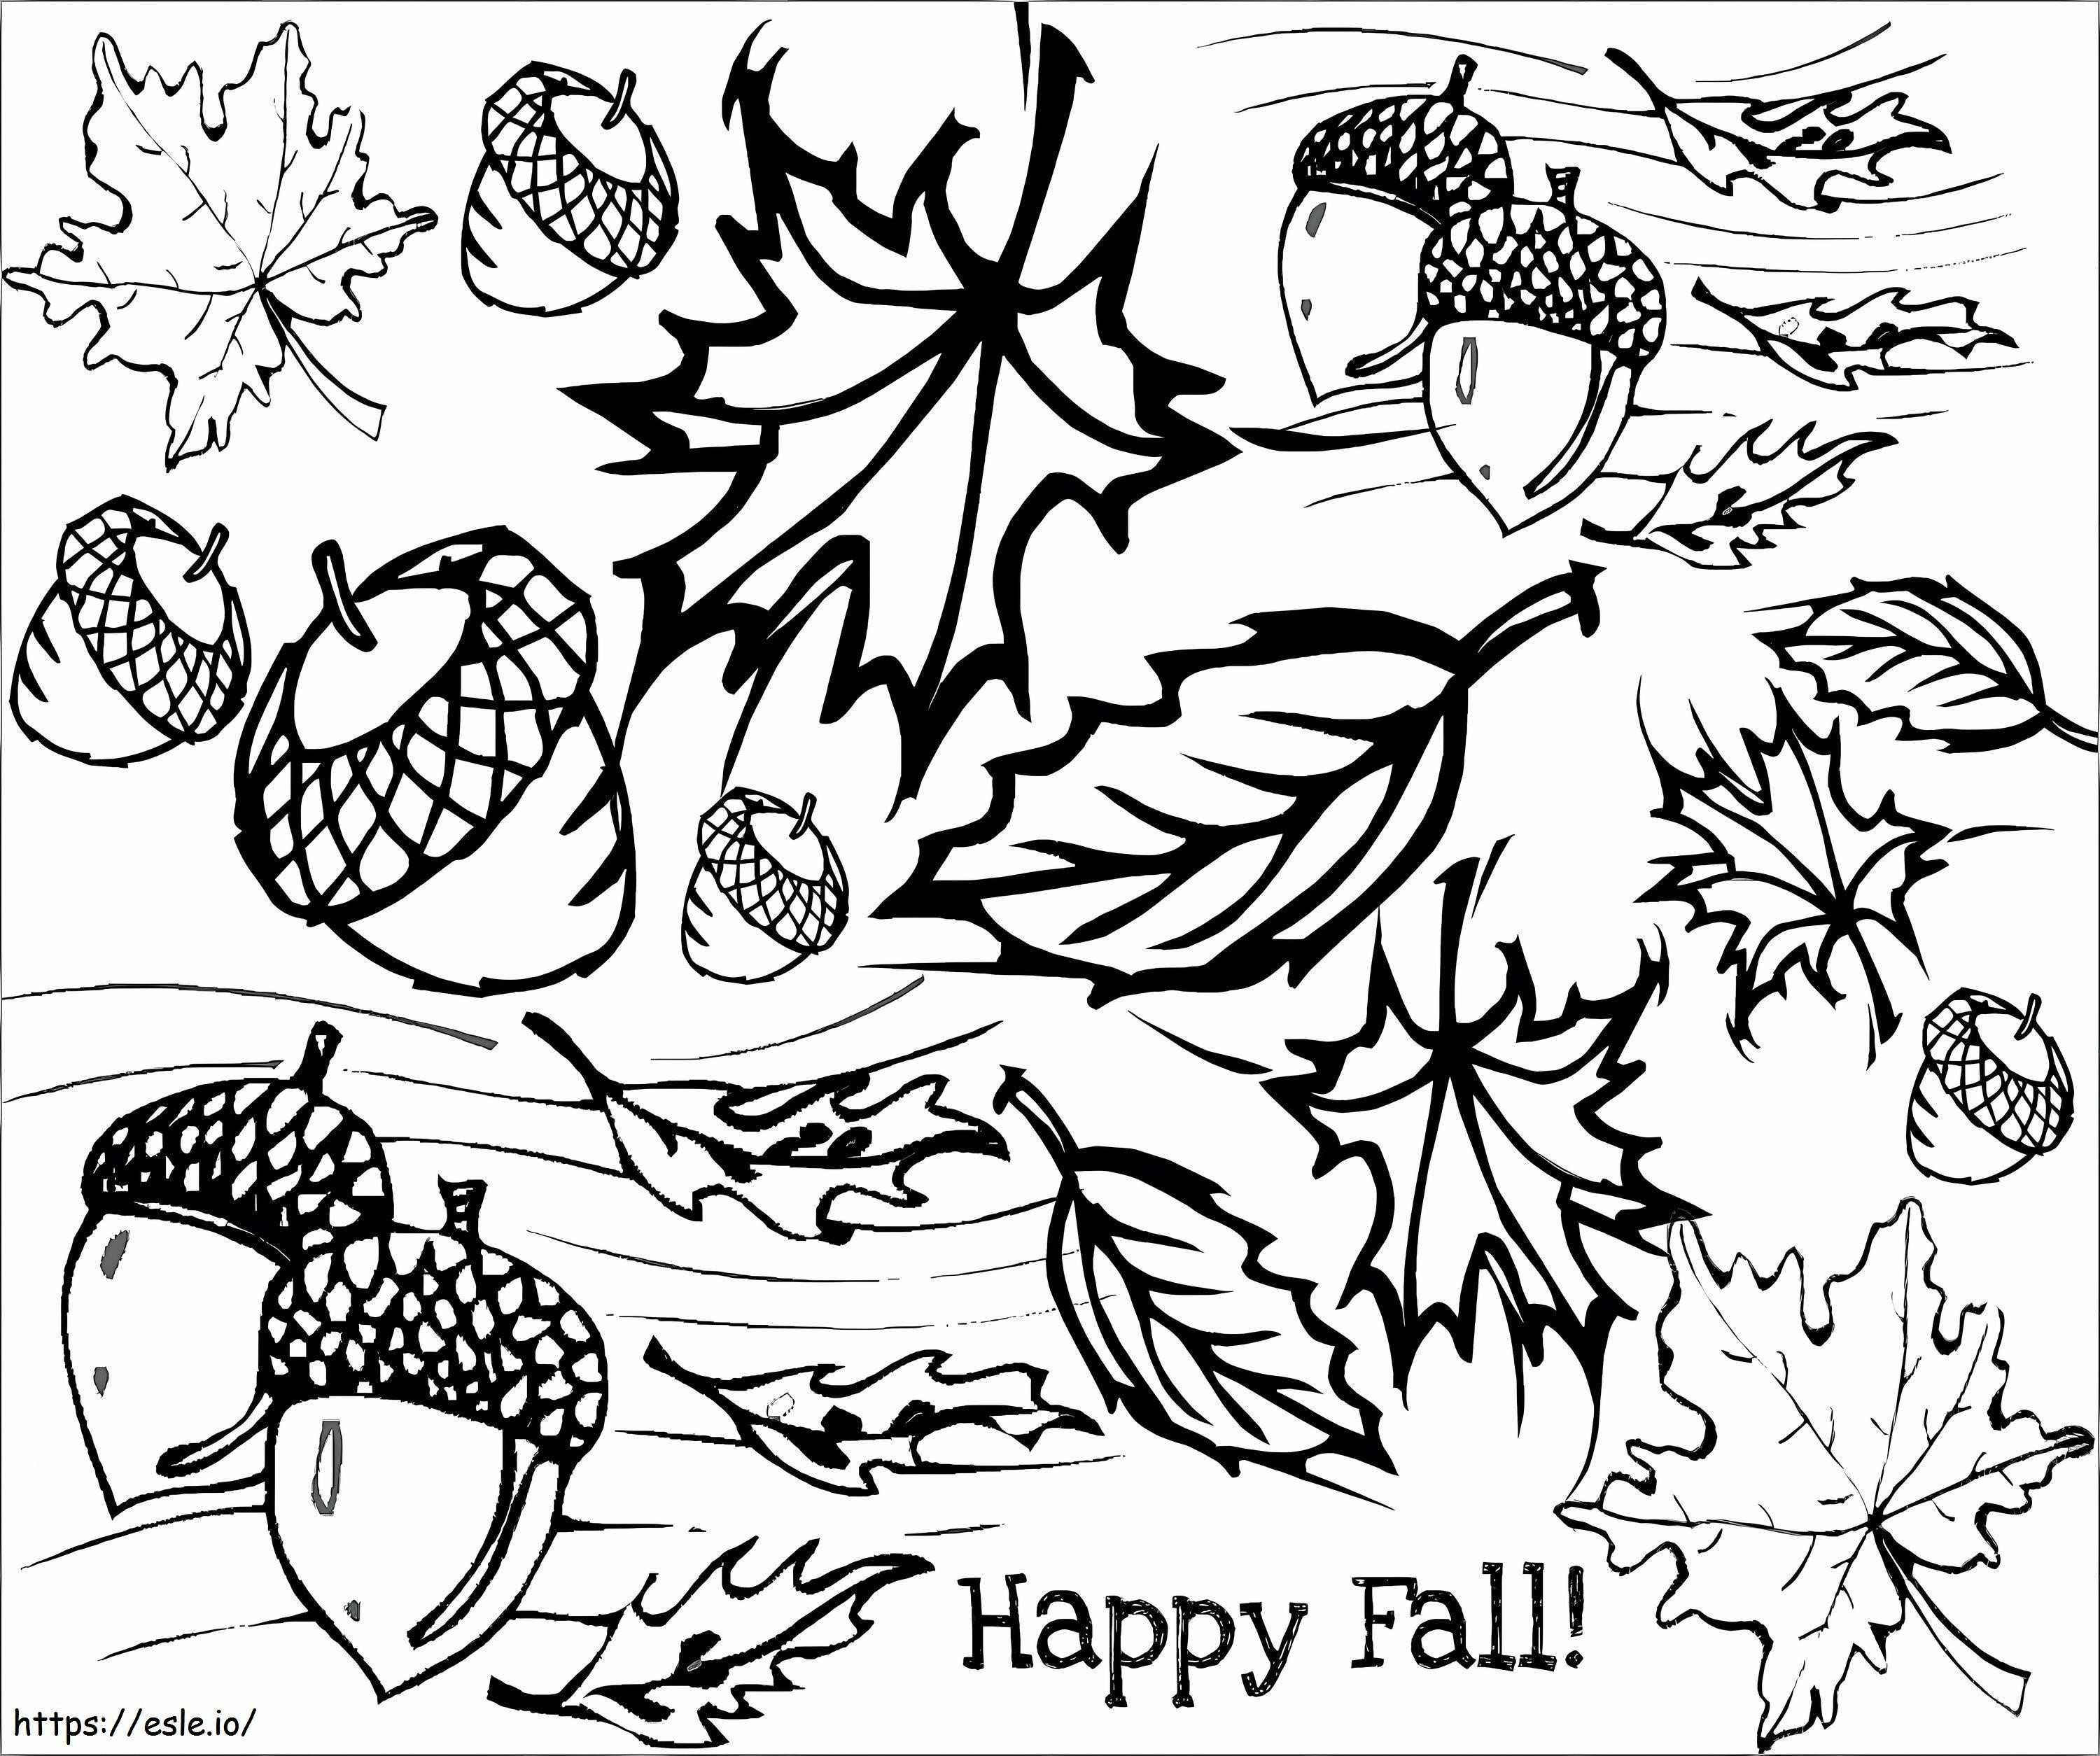 Amazing Autumn coloring page